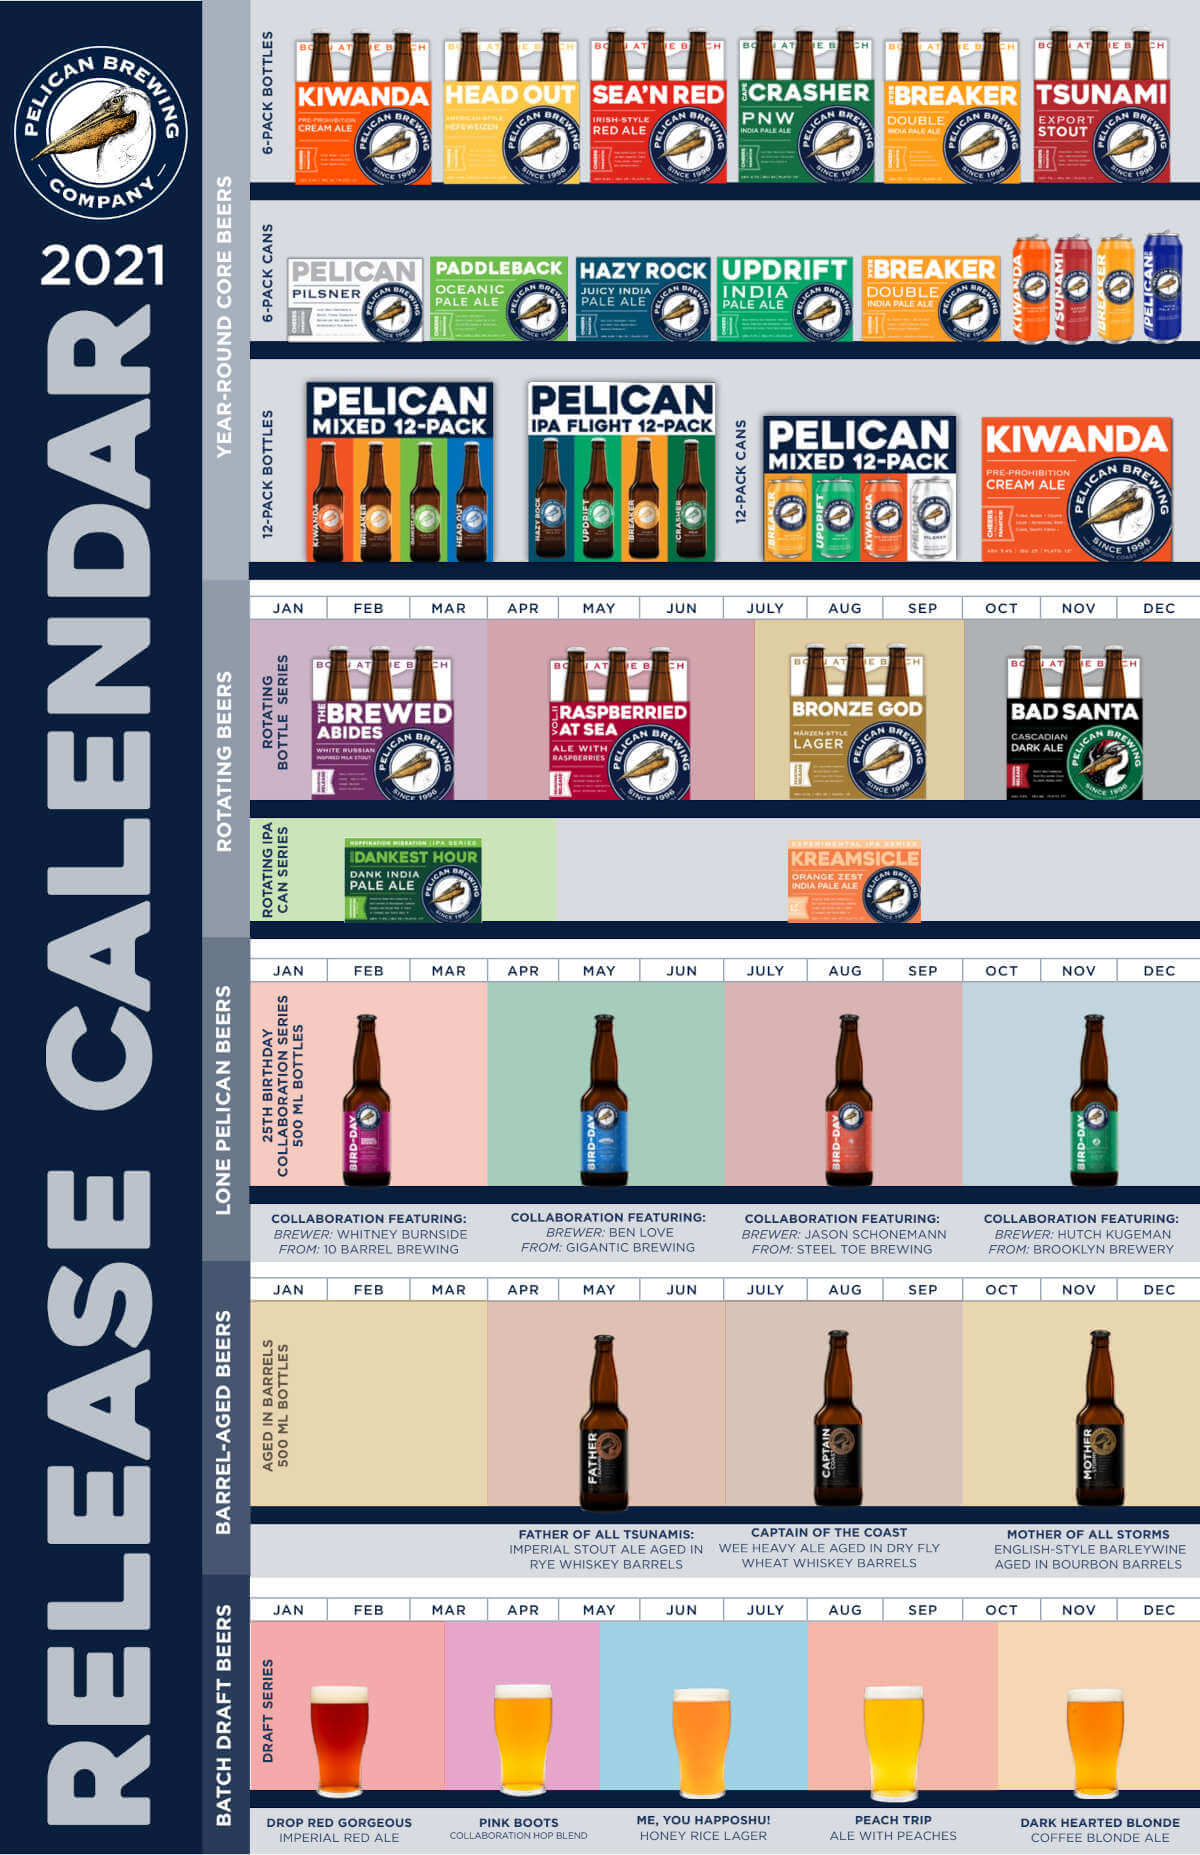 Pelican Brewing announces 2021 beer schedule ahead of its 25th anniversary